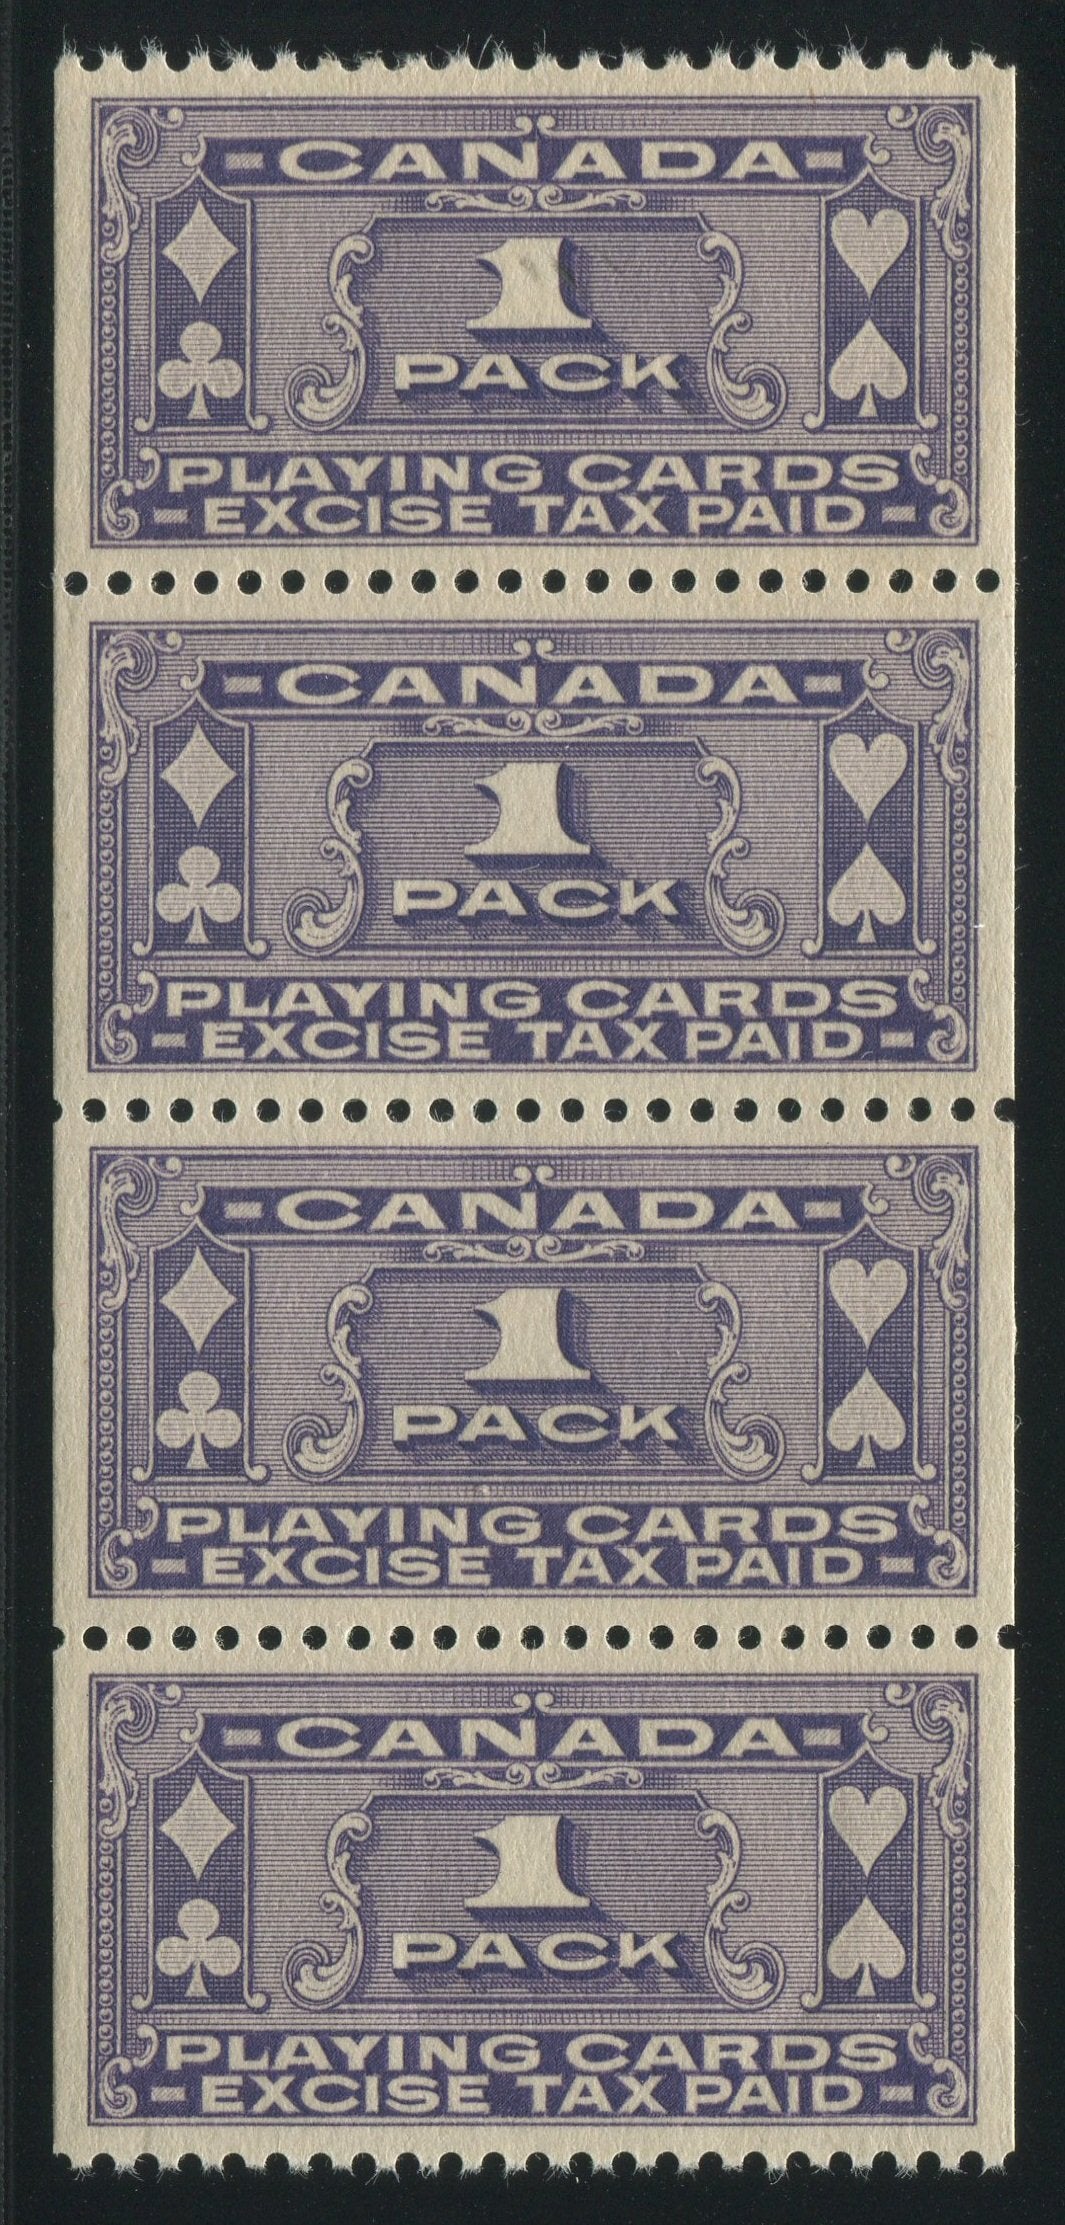 0003PC1708 - FPC1a - Mint Coil Strip of 4 - Deveney Stamps Ltd. Canadian Stamps